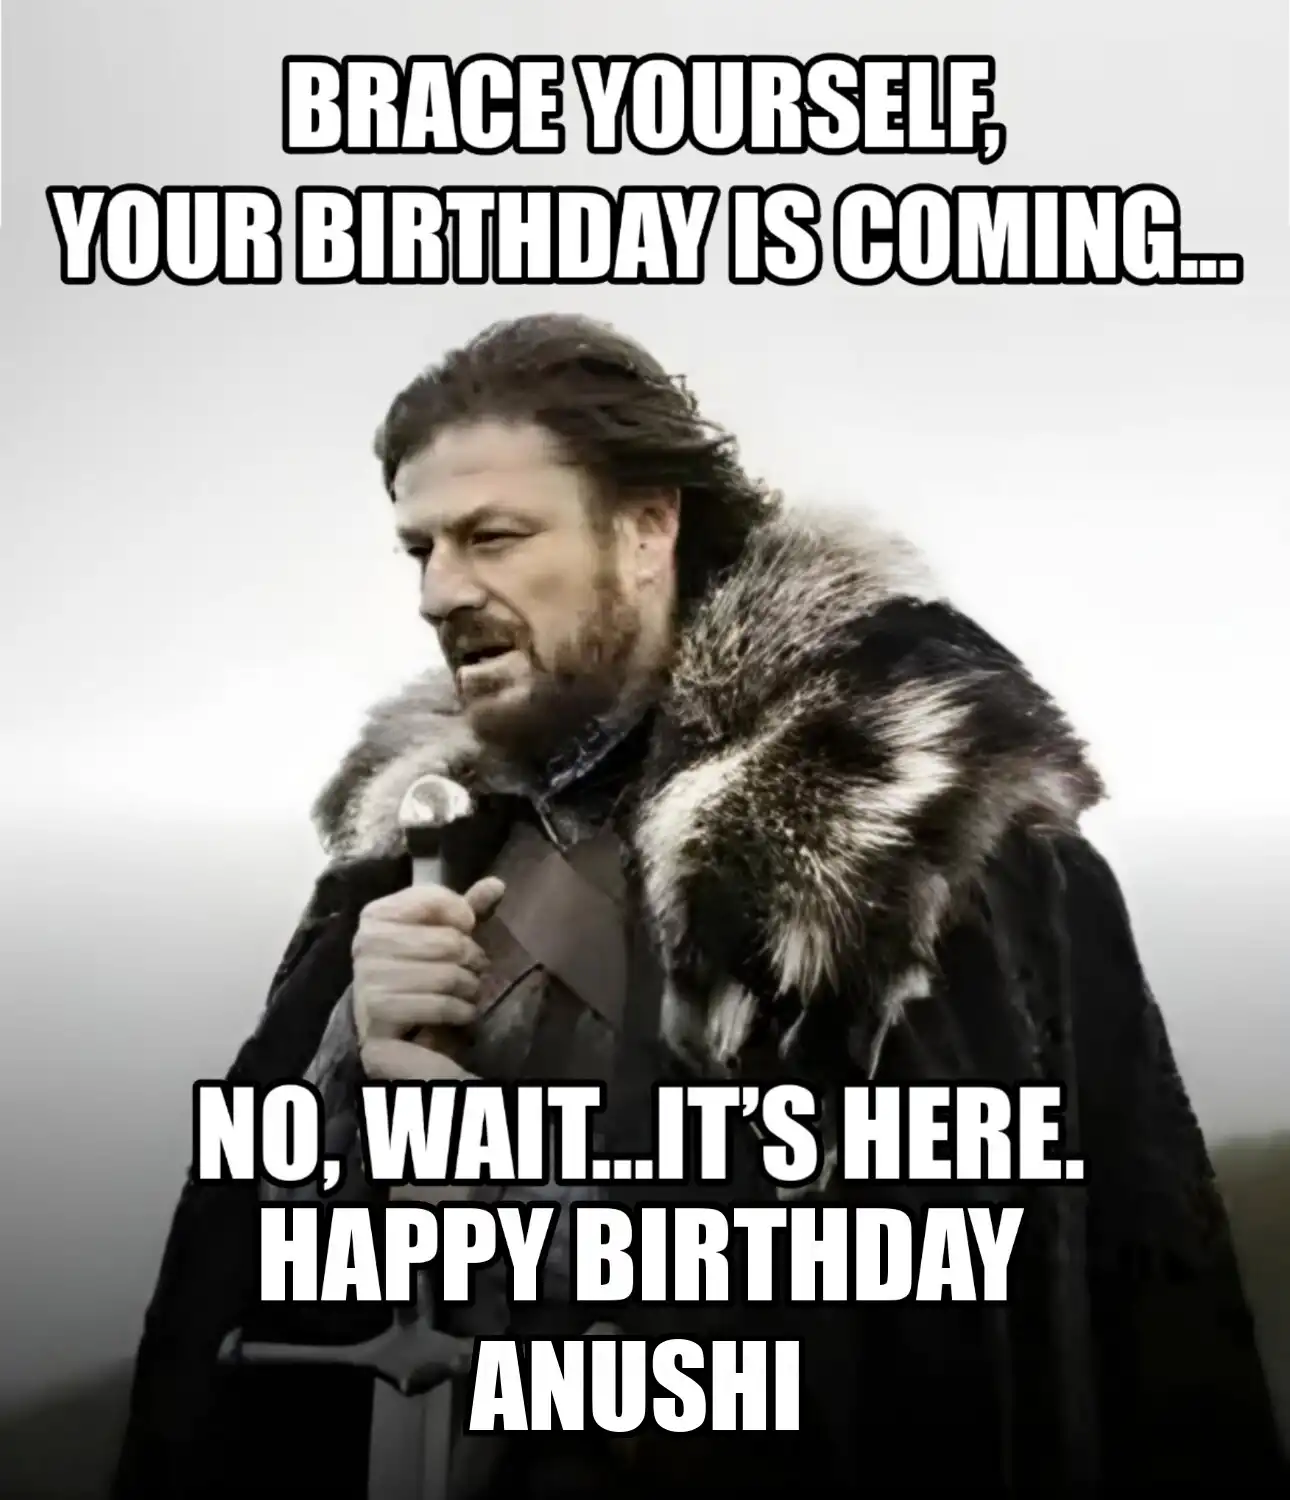 Happy Birthday Anushi Brace Yourself Your Birthday Is Coming Meme